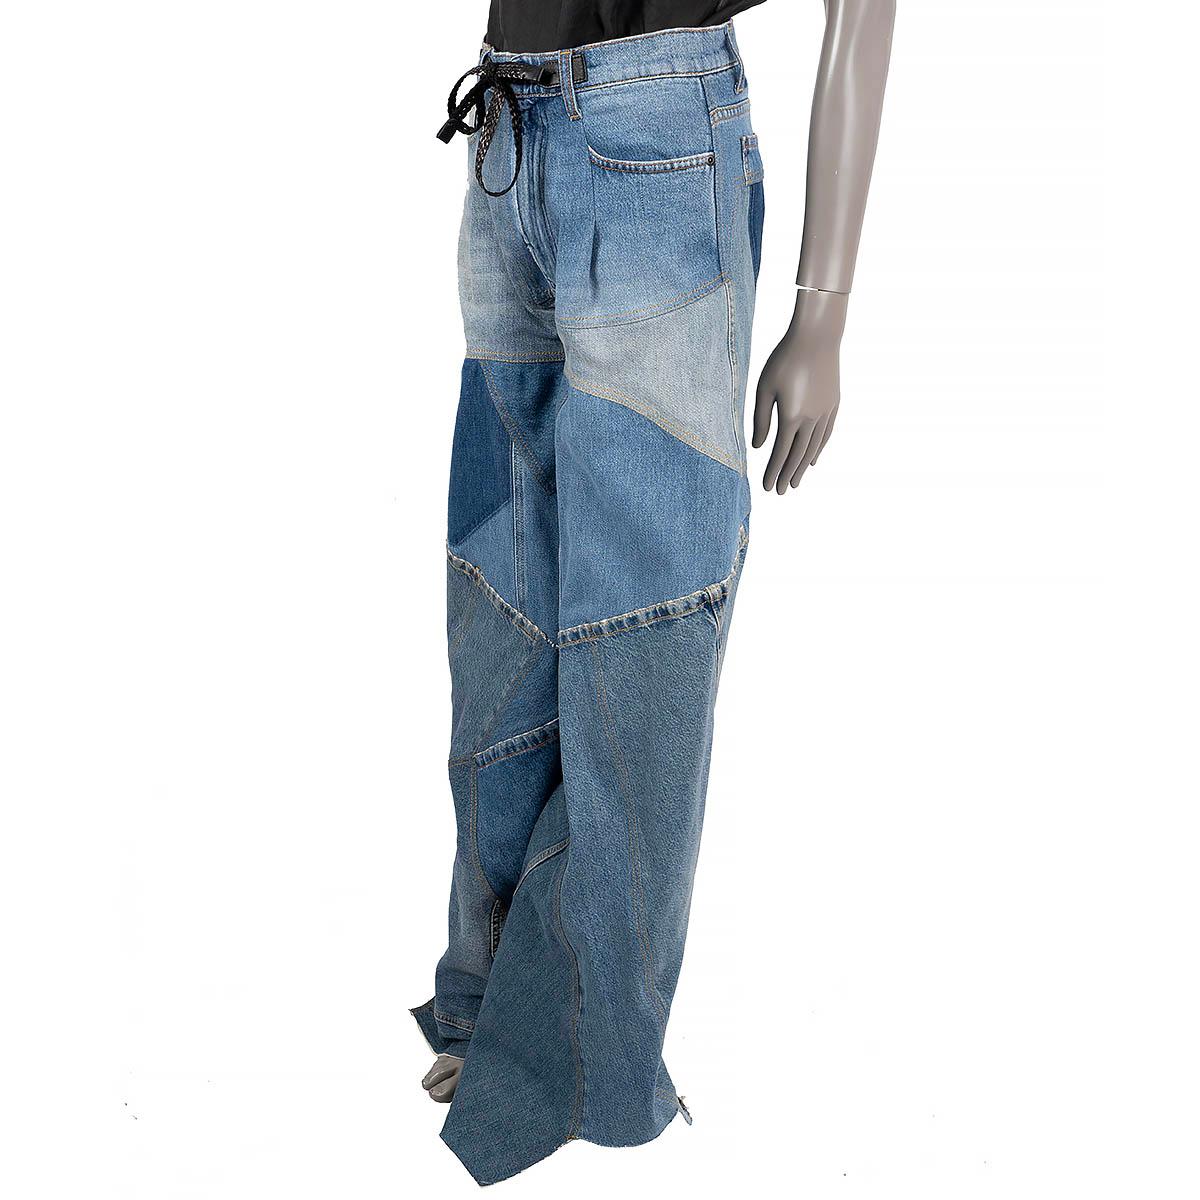 100% authentic Tom Ford high rise jeans in blue patchwork cotton denim (100%). Features wide legs, distressed edges, two leather patches at the waistband, three pockets at the front and one at the back. Have been worn and are in excellent